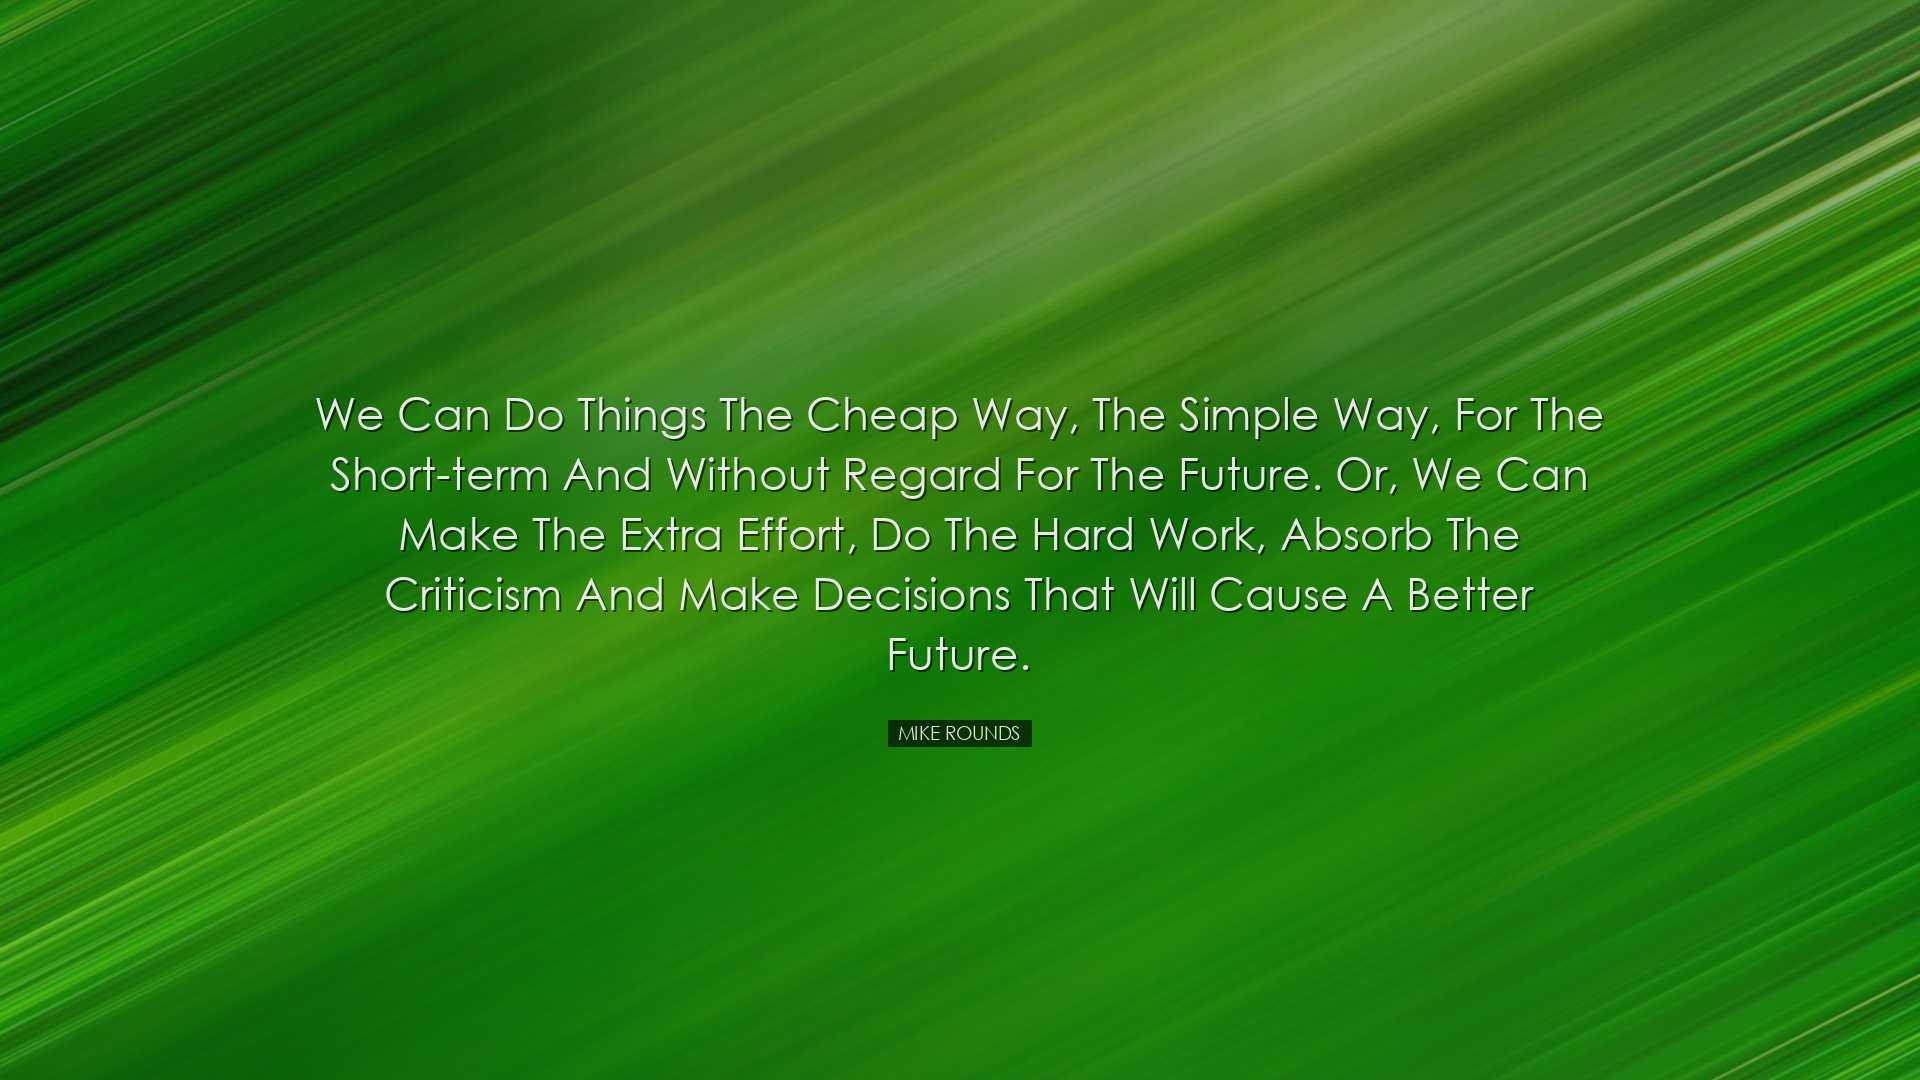 We can do things the cheap way, the simple way, for the short-term